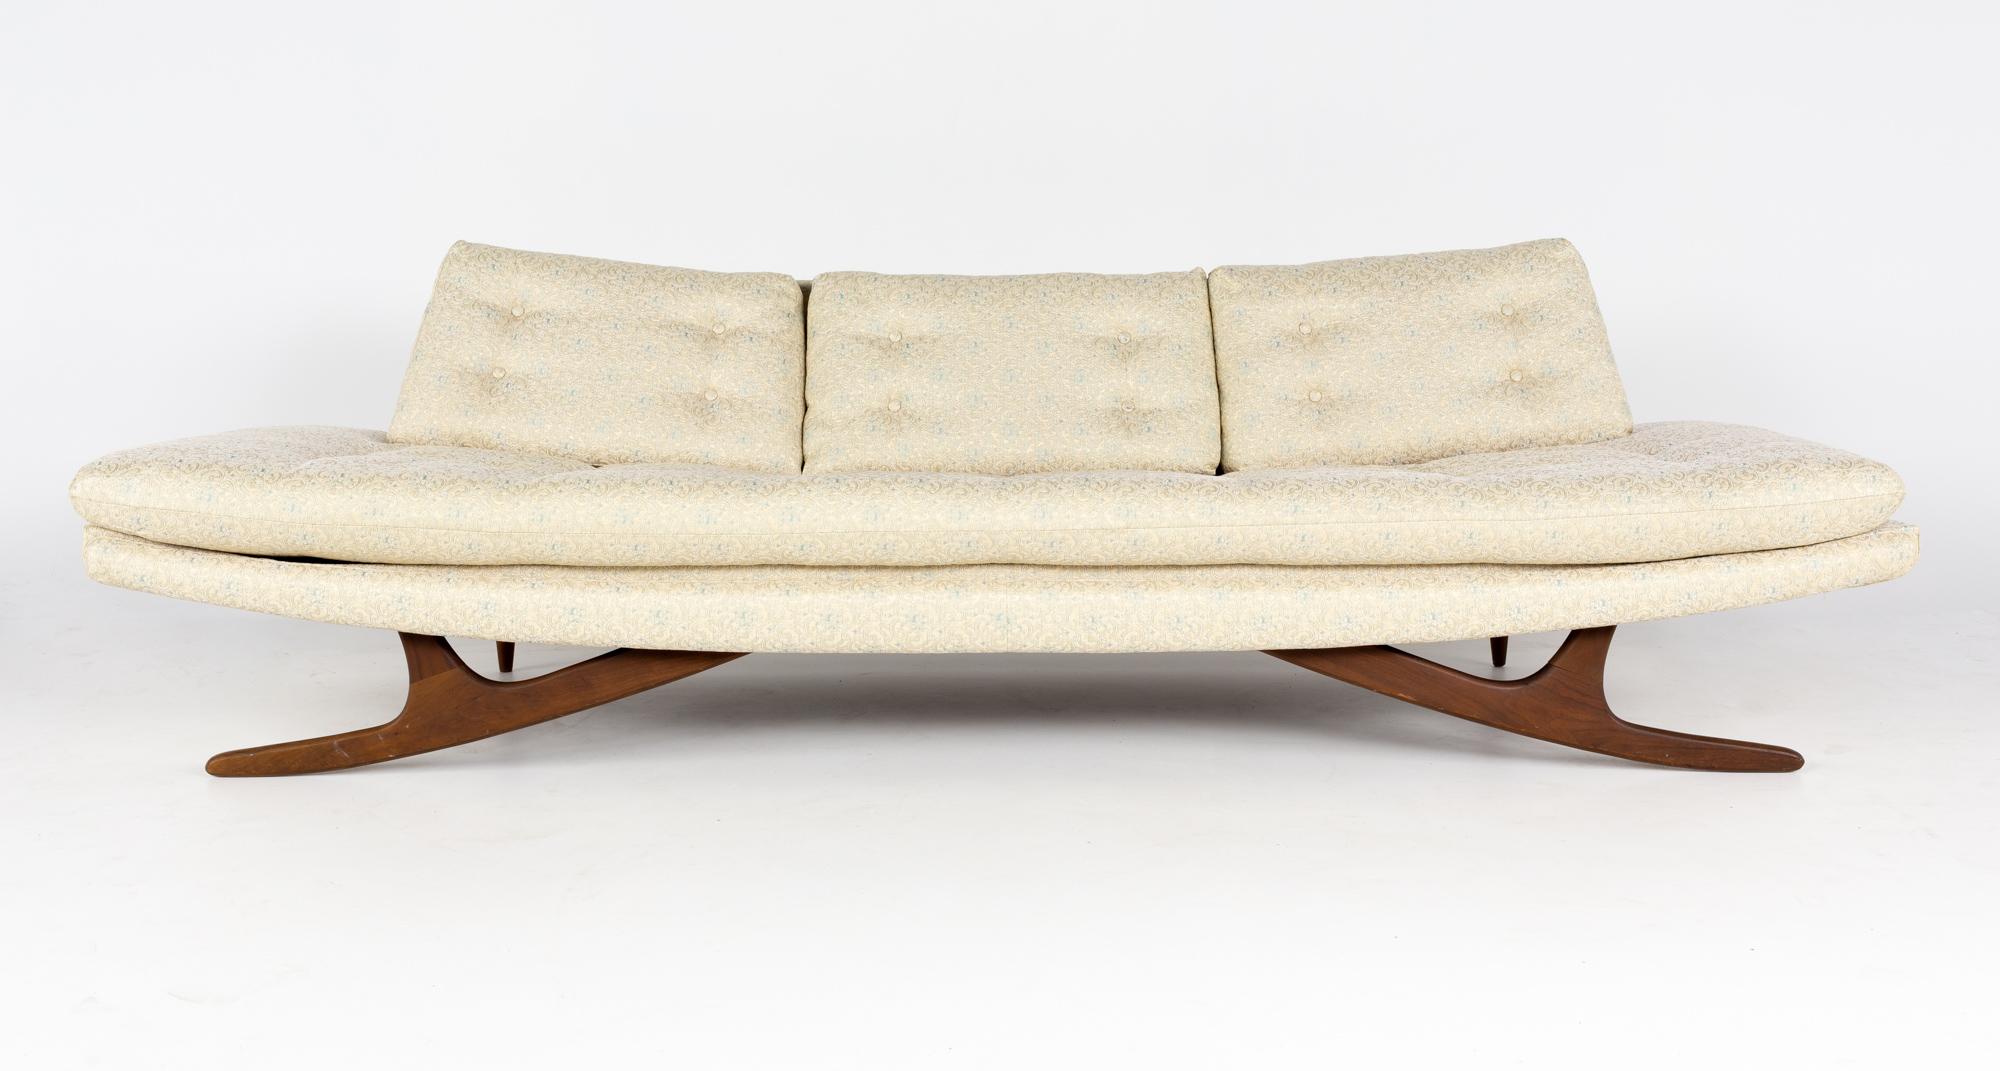 Adrian Pearsall mid century gondola sofa

This sofa measures: 104 wide x 34 deep x 31 inches high, with a seat height of 18.5 inches

All pieces of furniture can be had in what we call restored vintage condition. That means the piece is restored